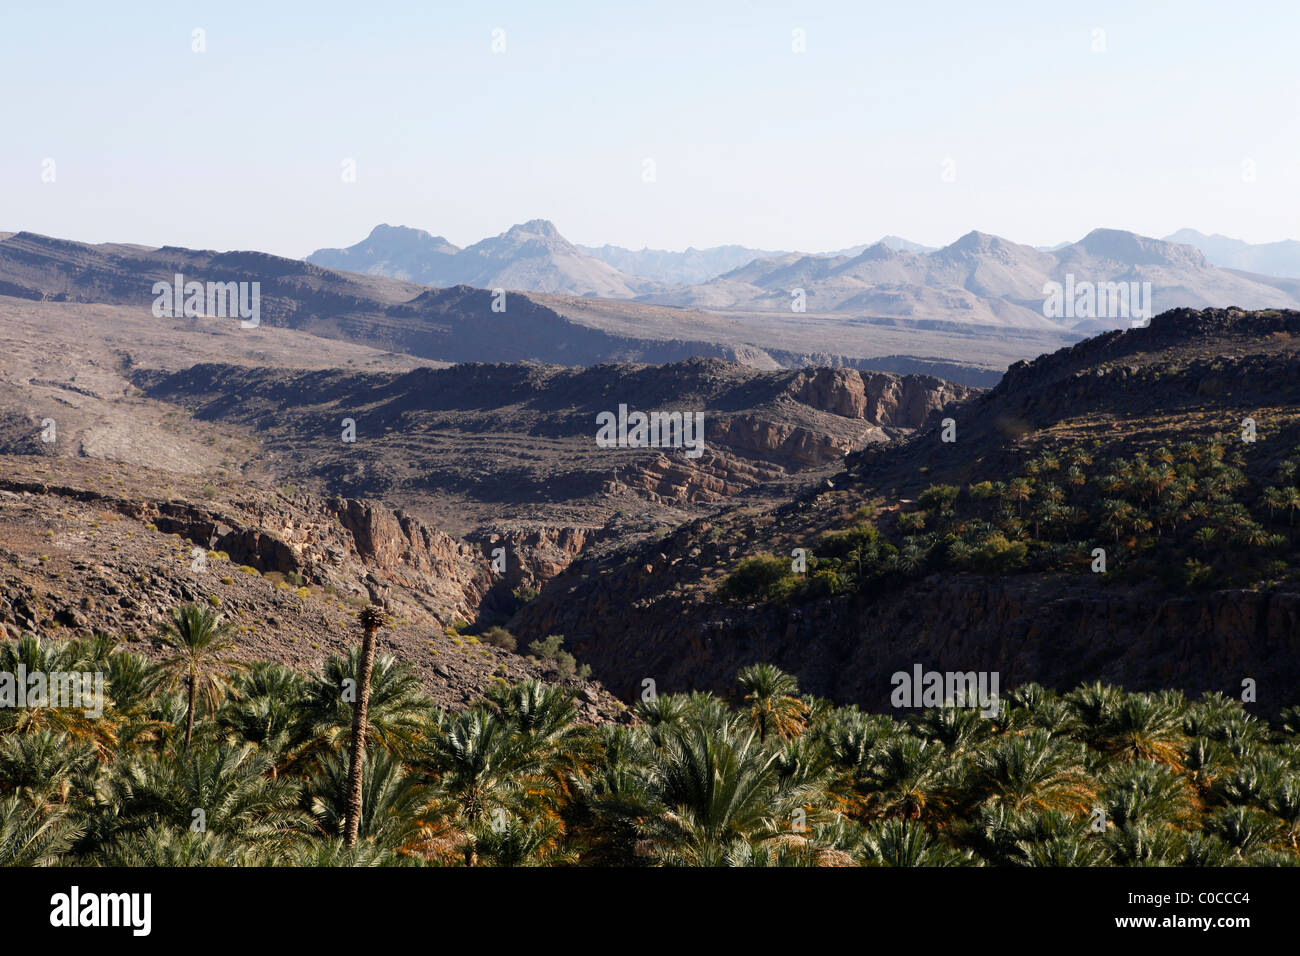 The arid interior of Oman, seen from the mountain village of Misfah. Stock Photo